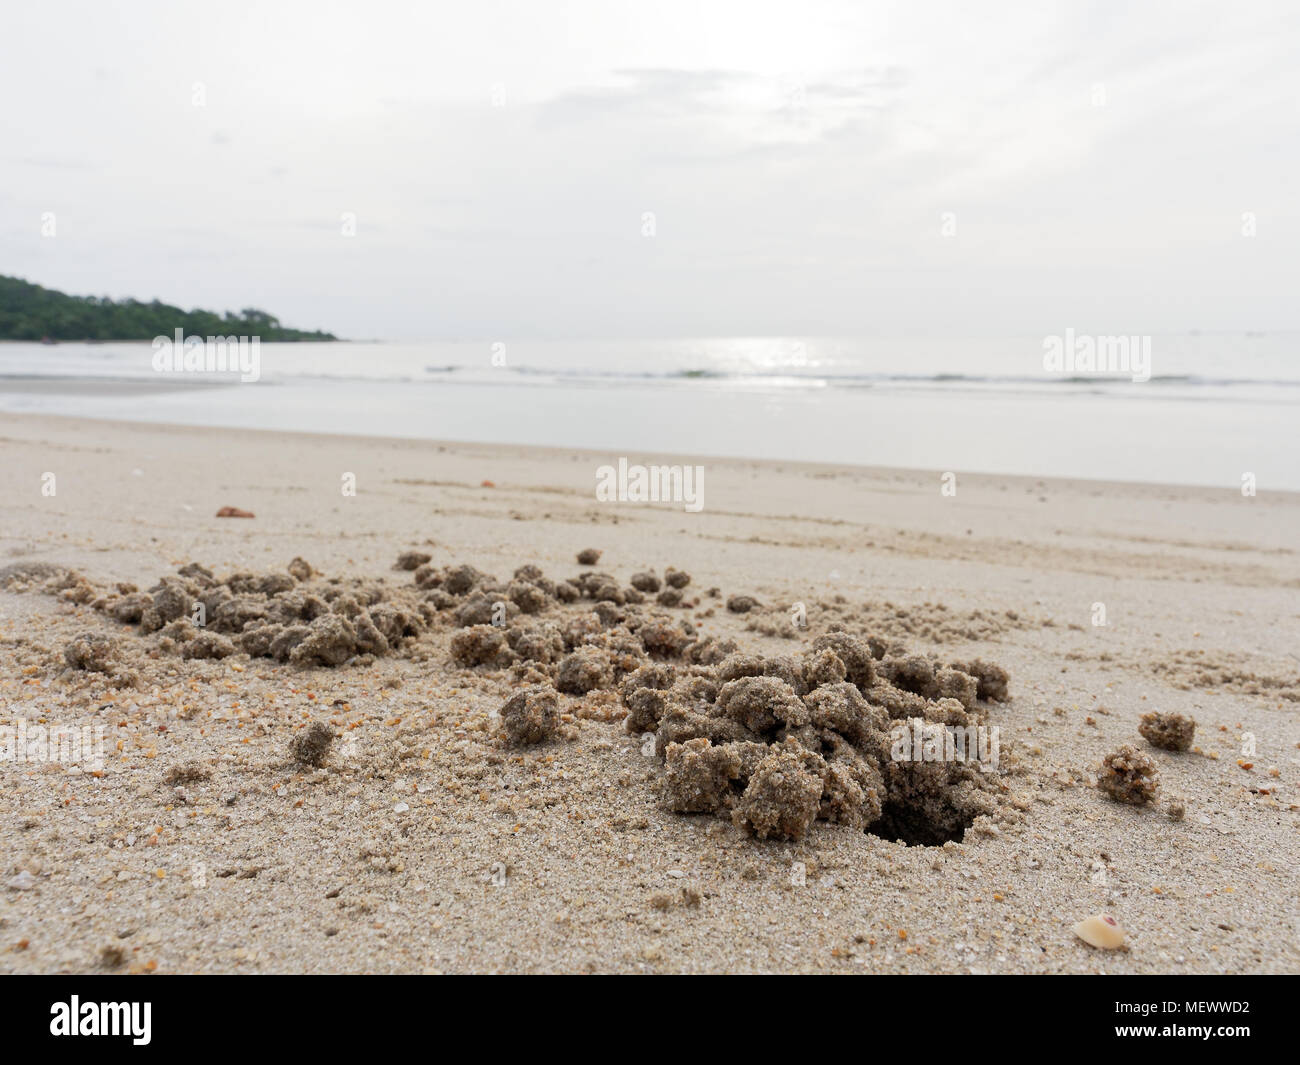 Burrow or hole with sediment balls or pellets made by sand of ghost or sand crab with beach, sea, and sky background Stock Photo